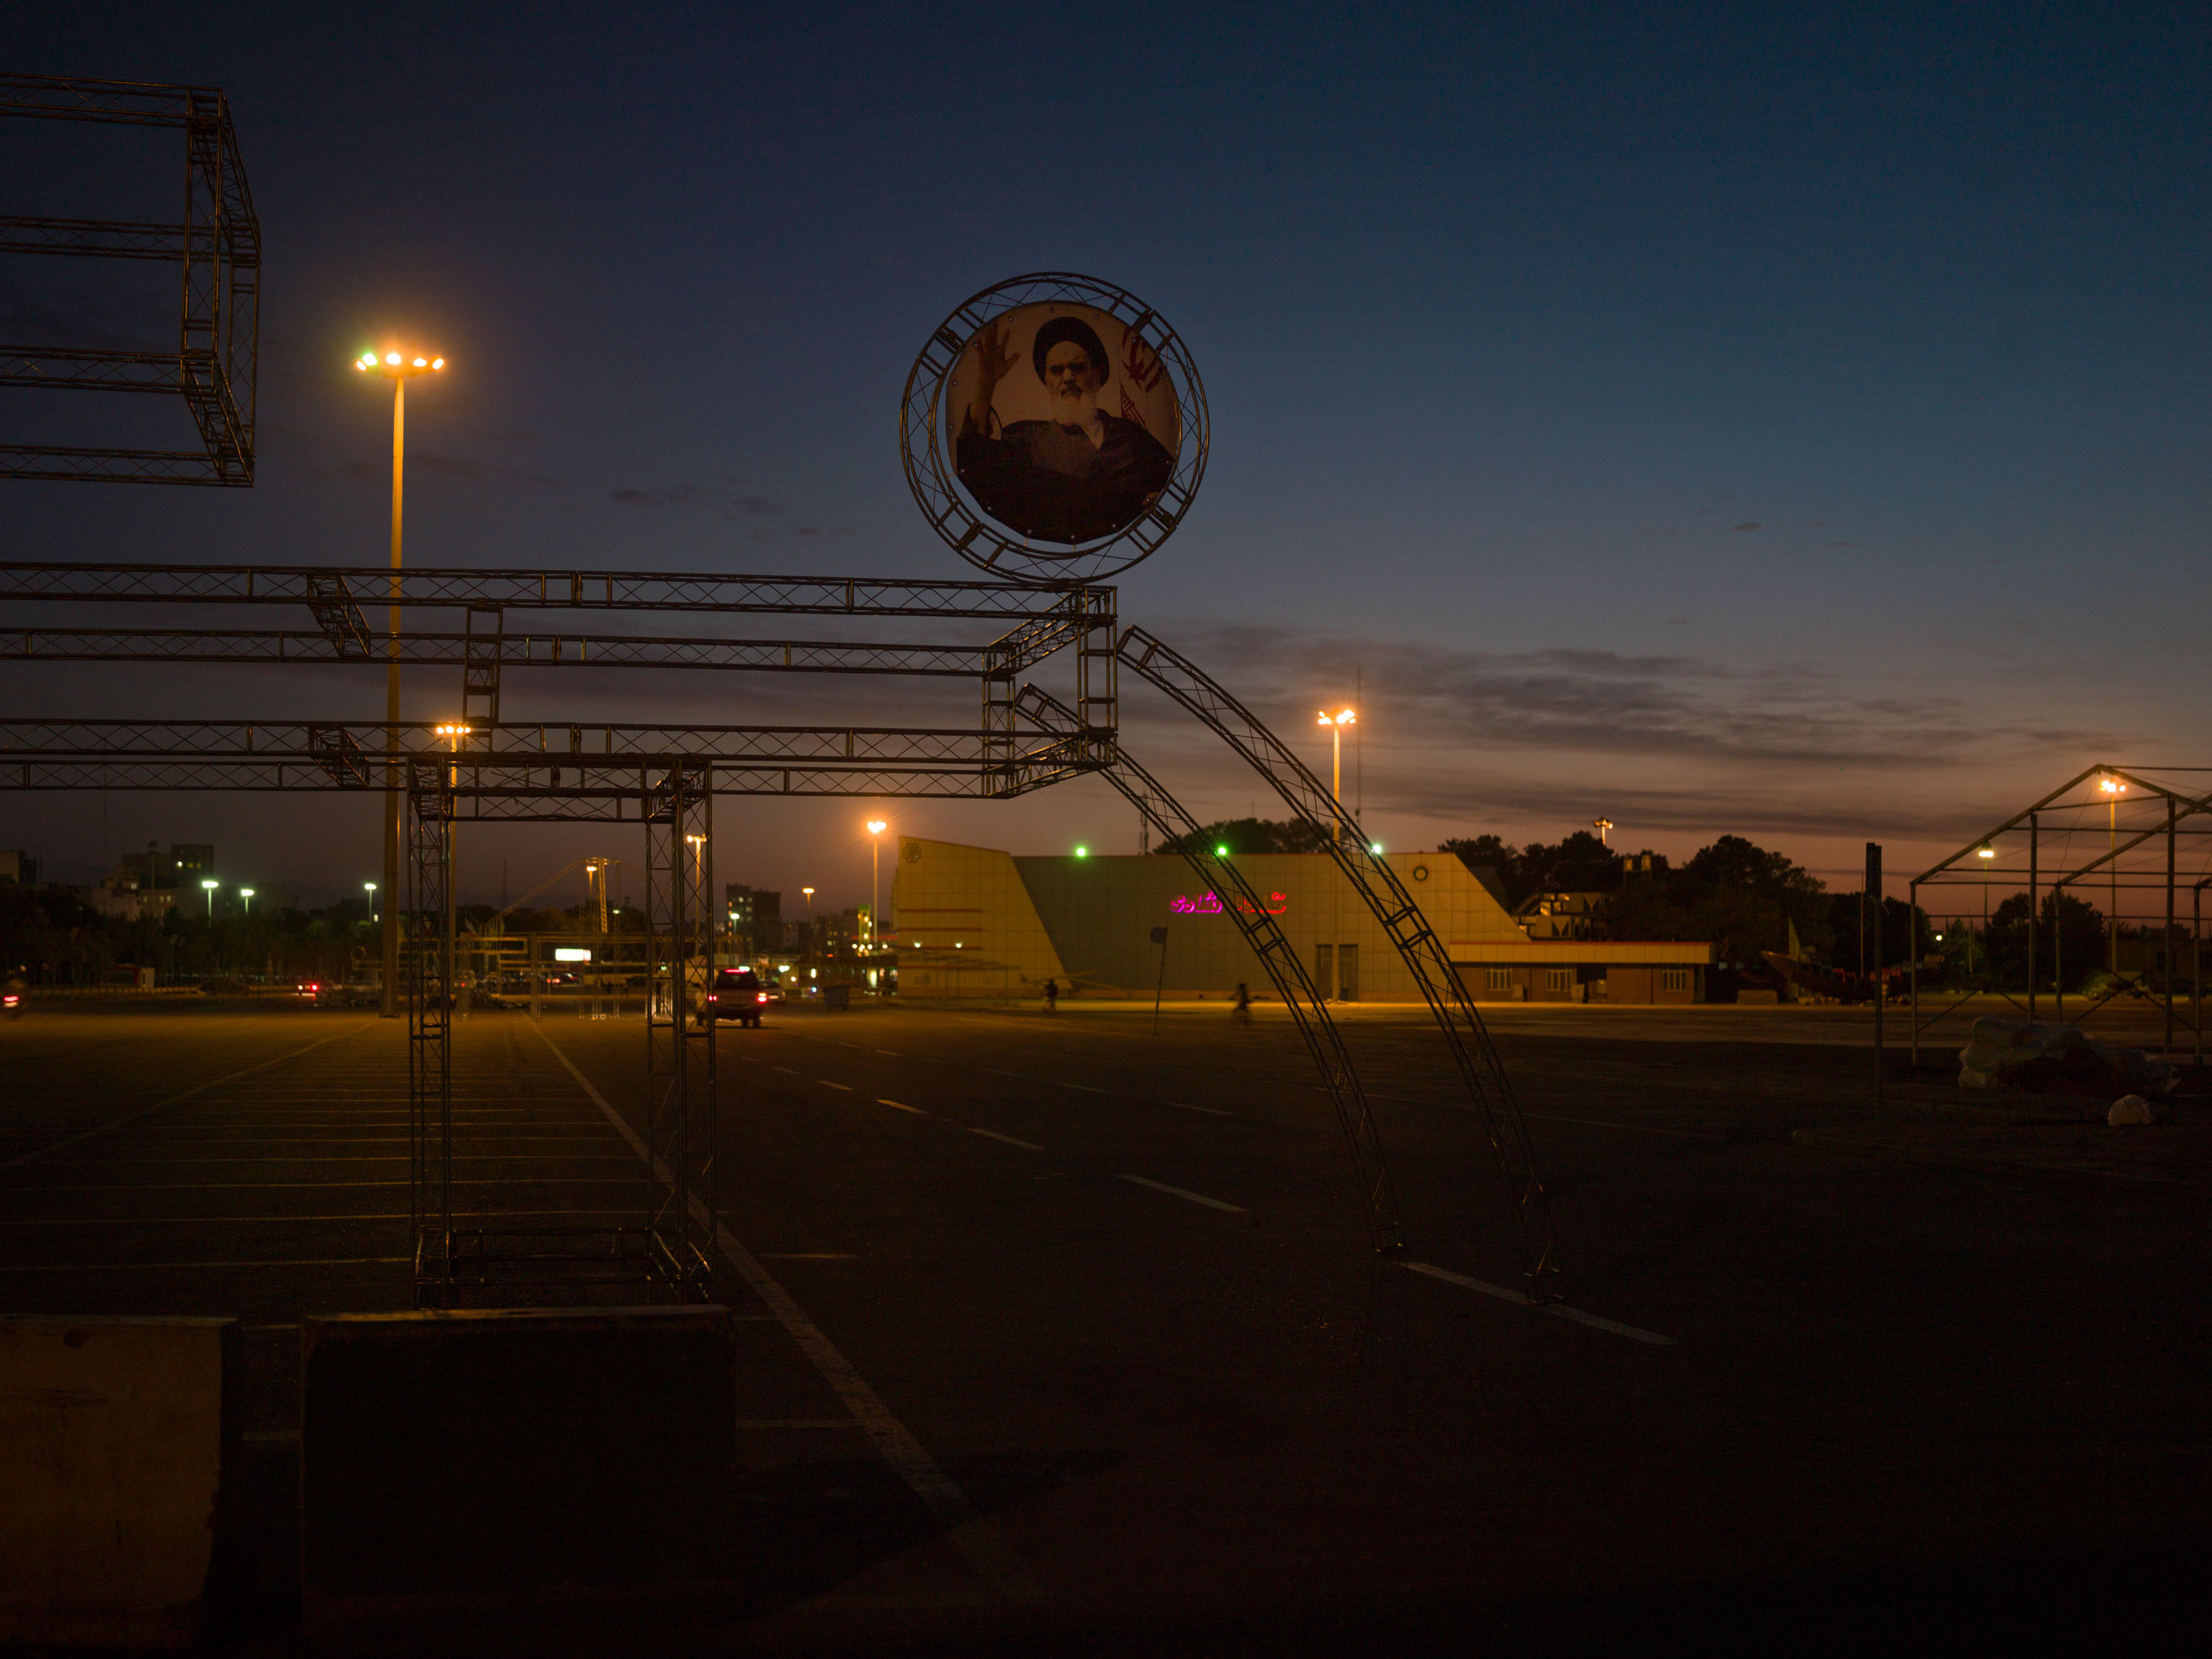 A portrait of  Ayatollah Ruhollah Khomeini, the  founder of the Islamic Republic of Iran, looms over an empty parking lot in Tehran.